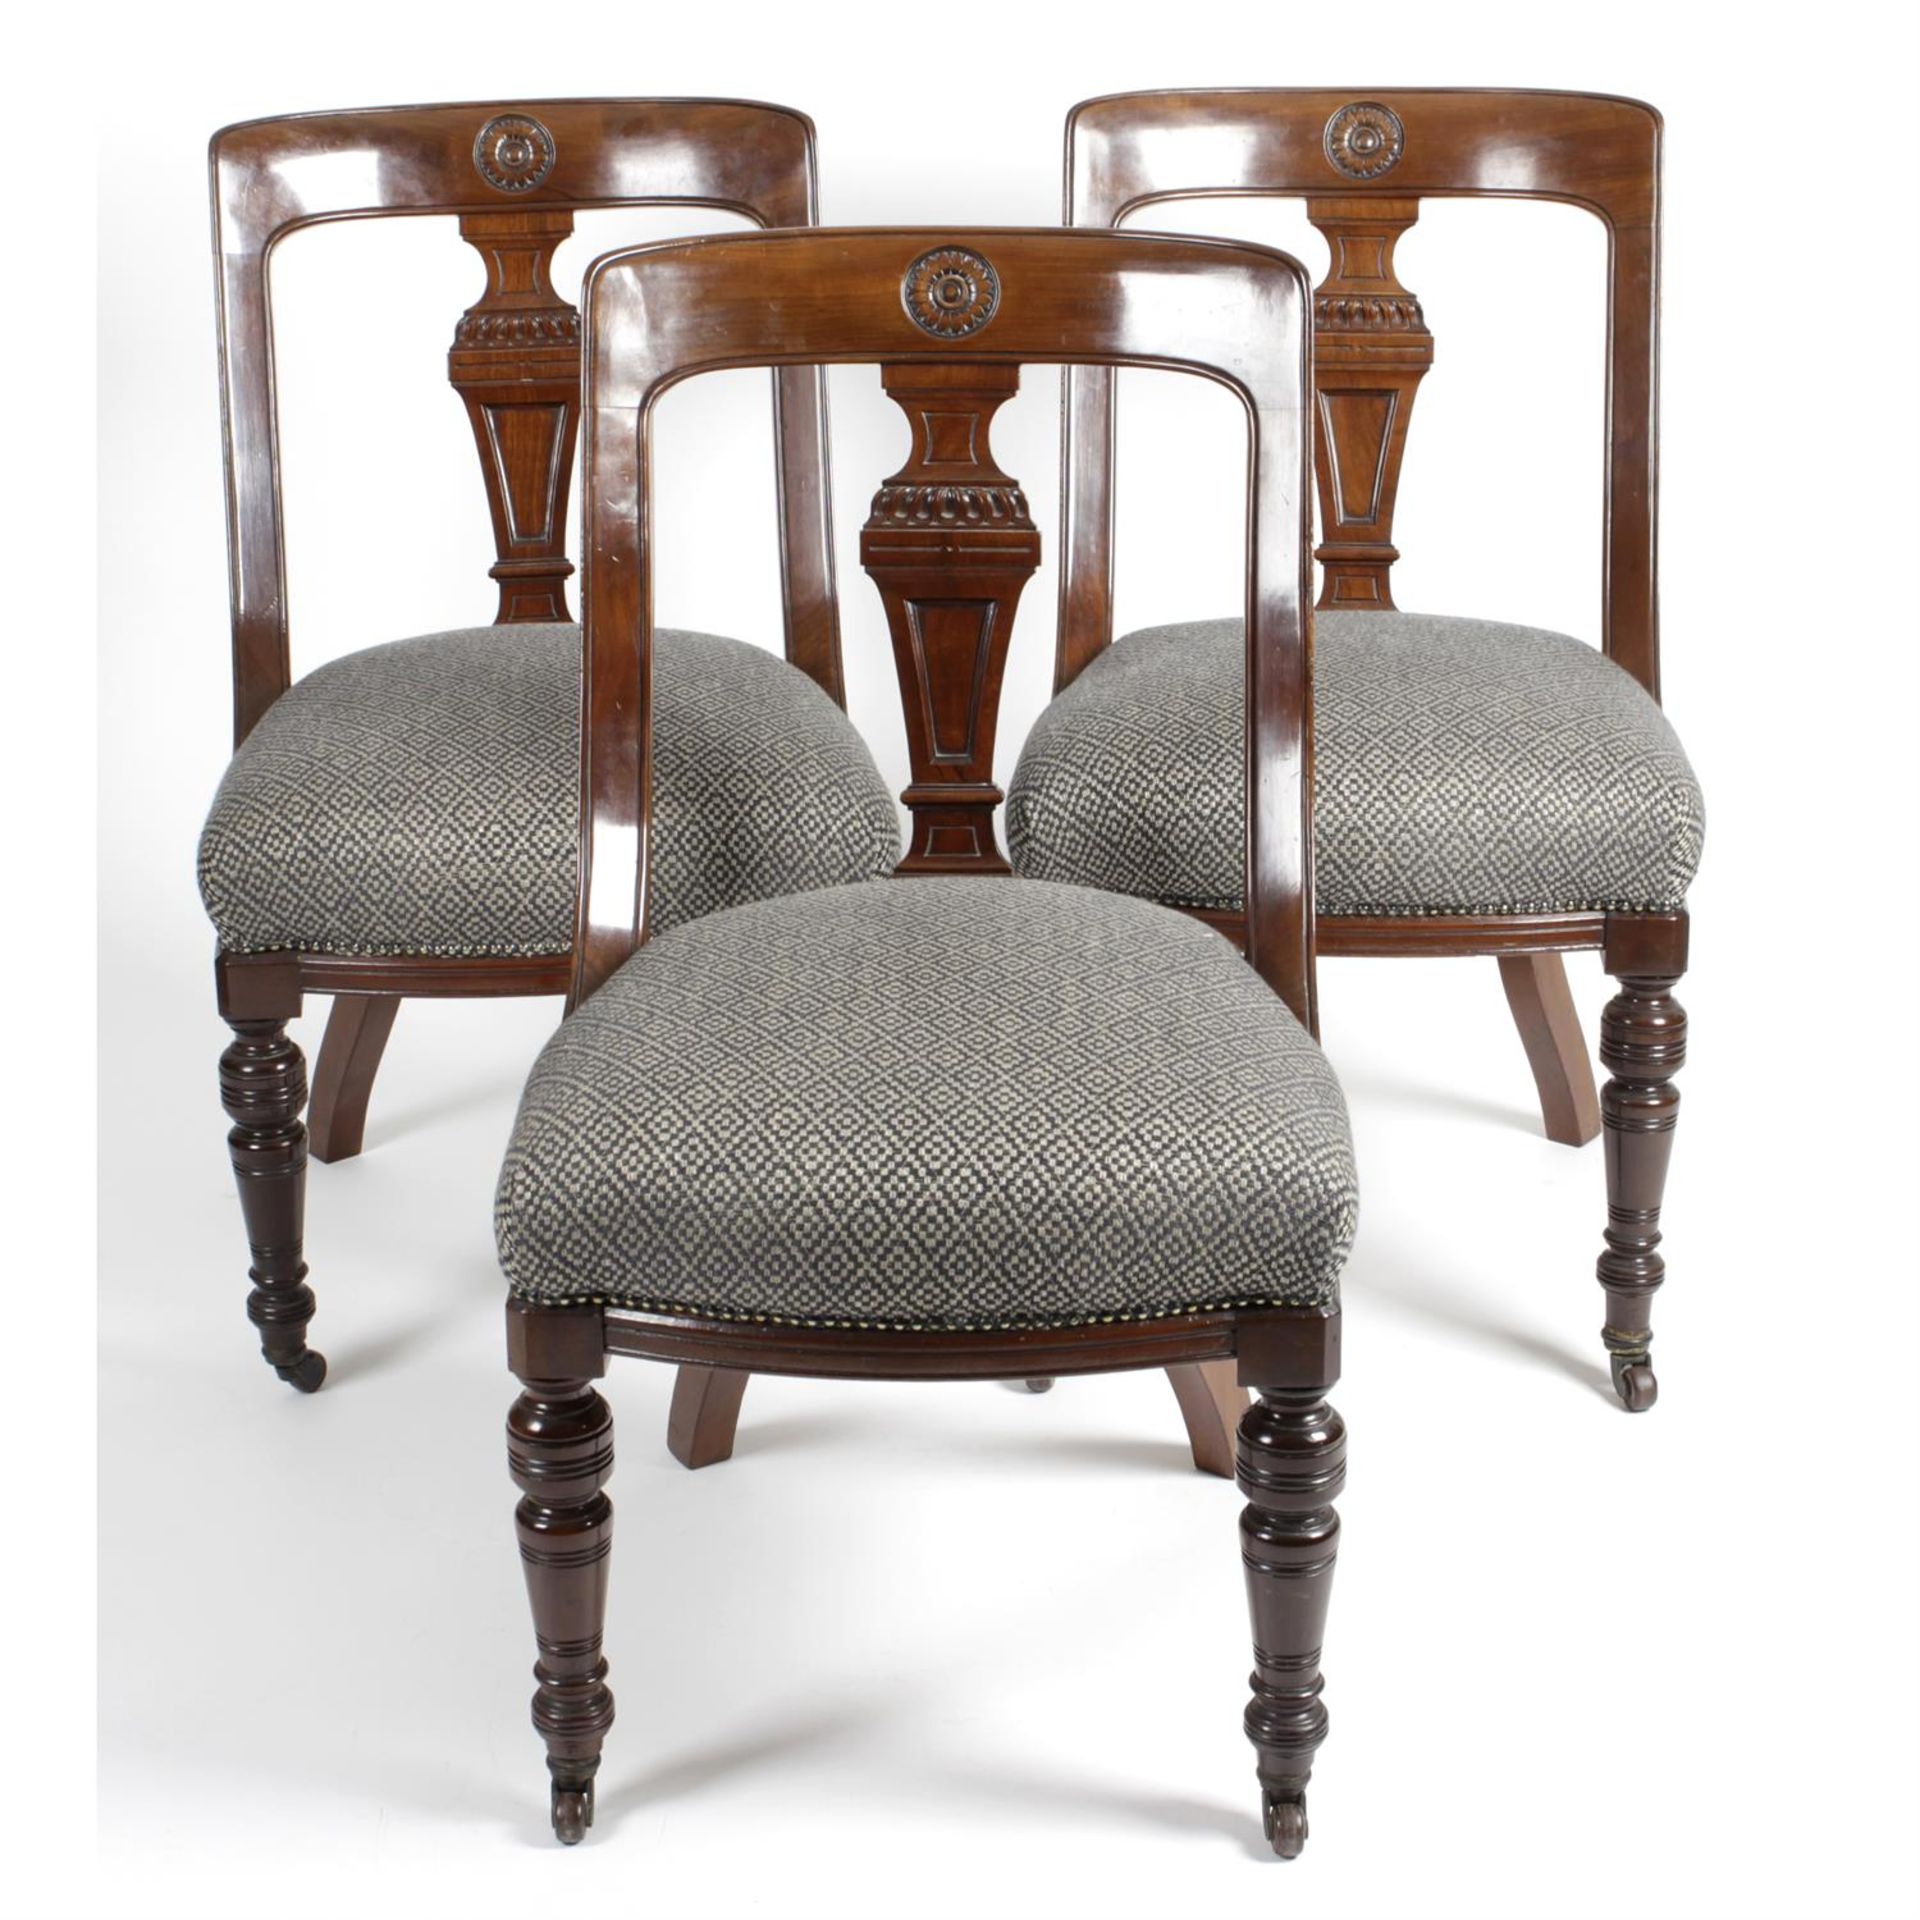 A Victorian mahogany extending dining room table with six dining room chairs.